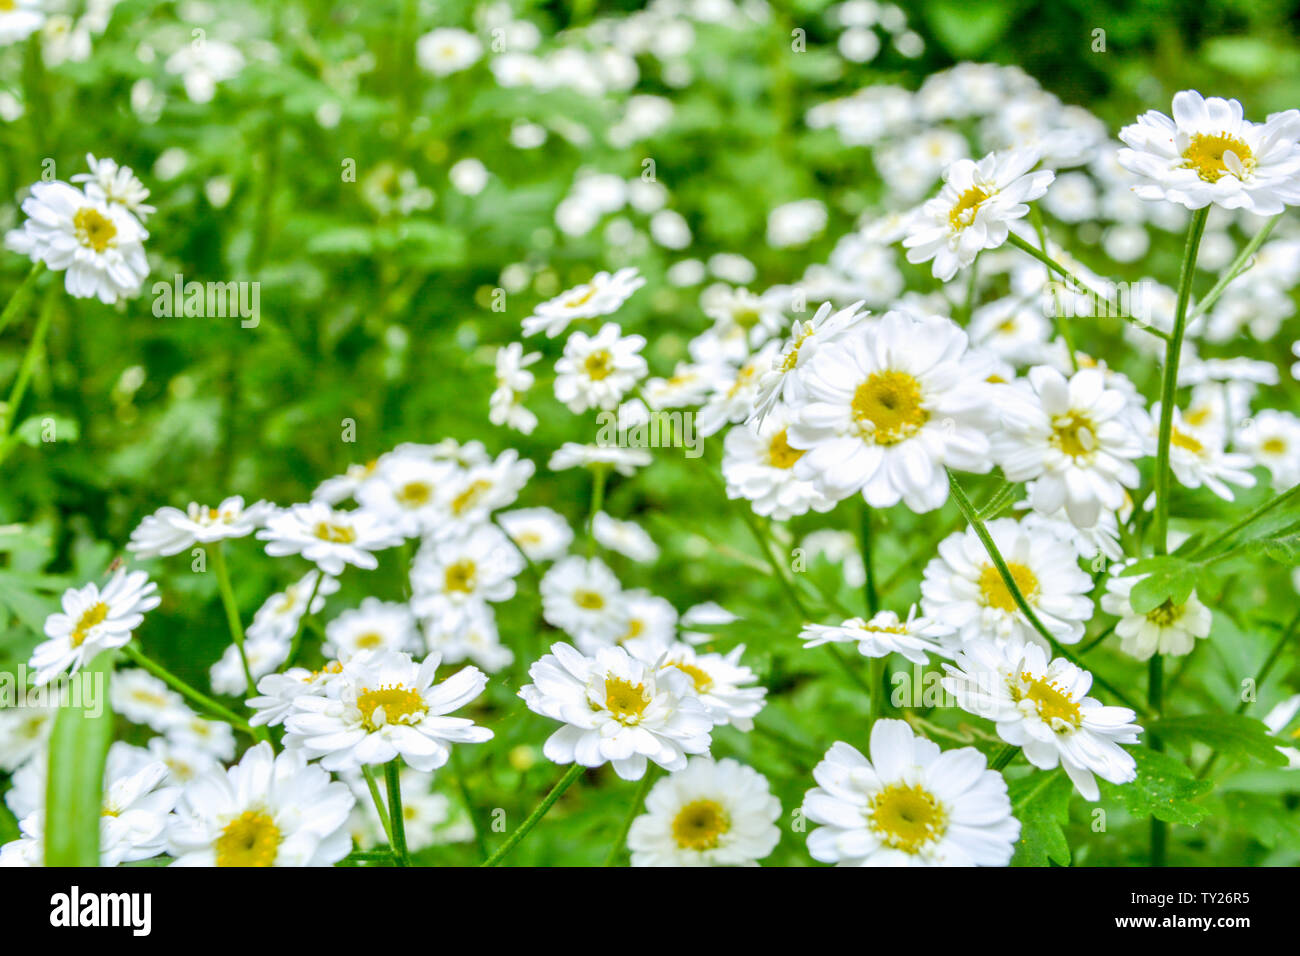 White and yellow flowers of Feverfew Pyrethrum or Tanacetum Corymbosum or Chrysanthemum Parthenium close-up with green grass background, selective foc Stock Photo